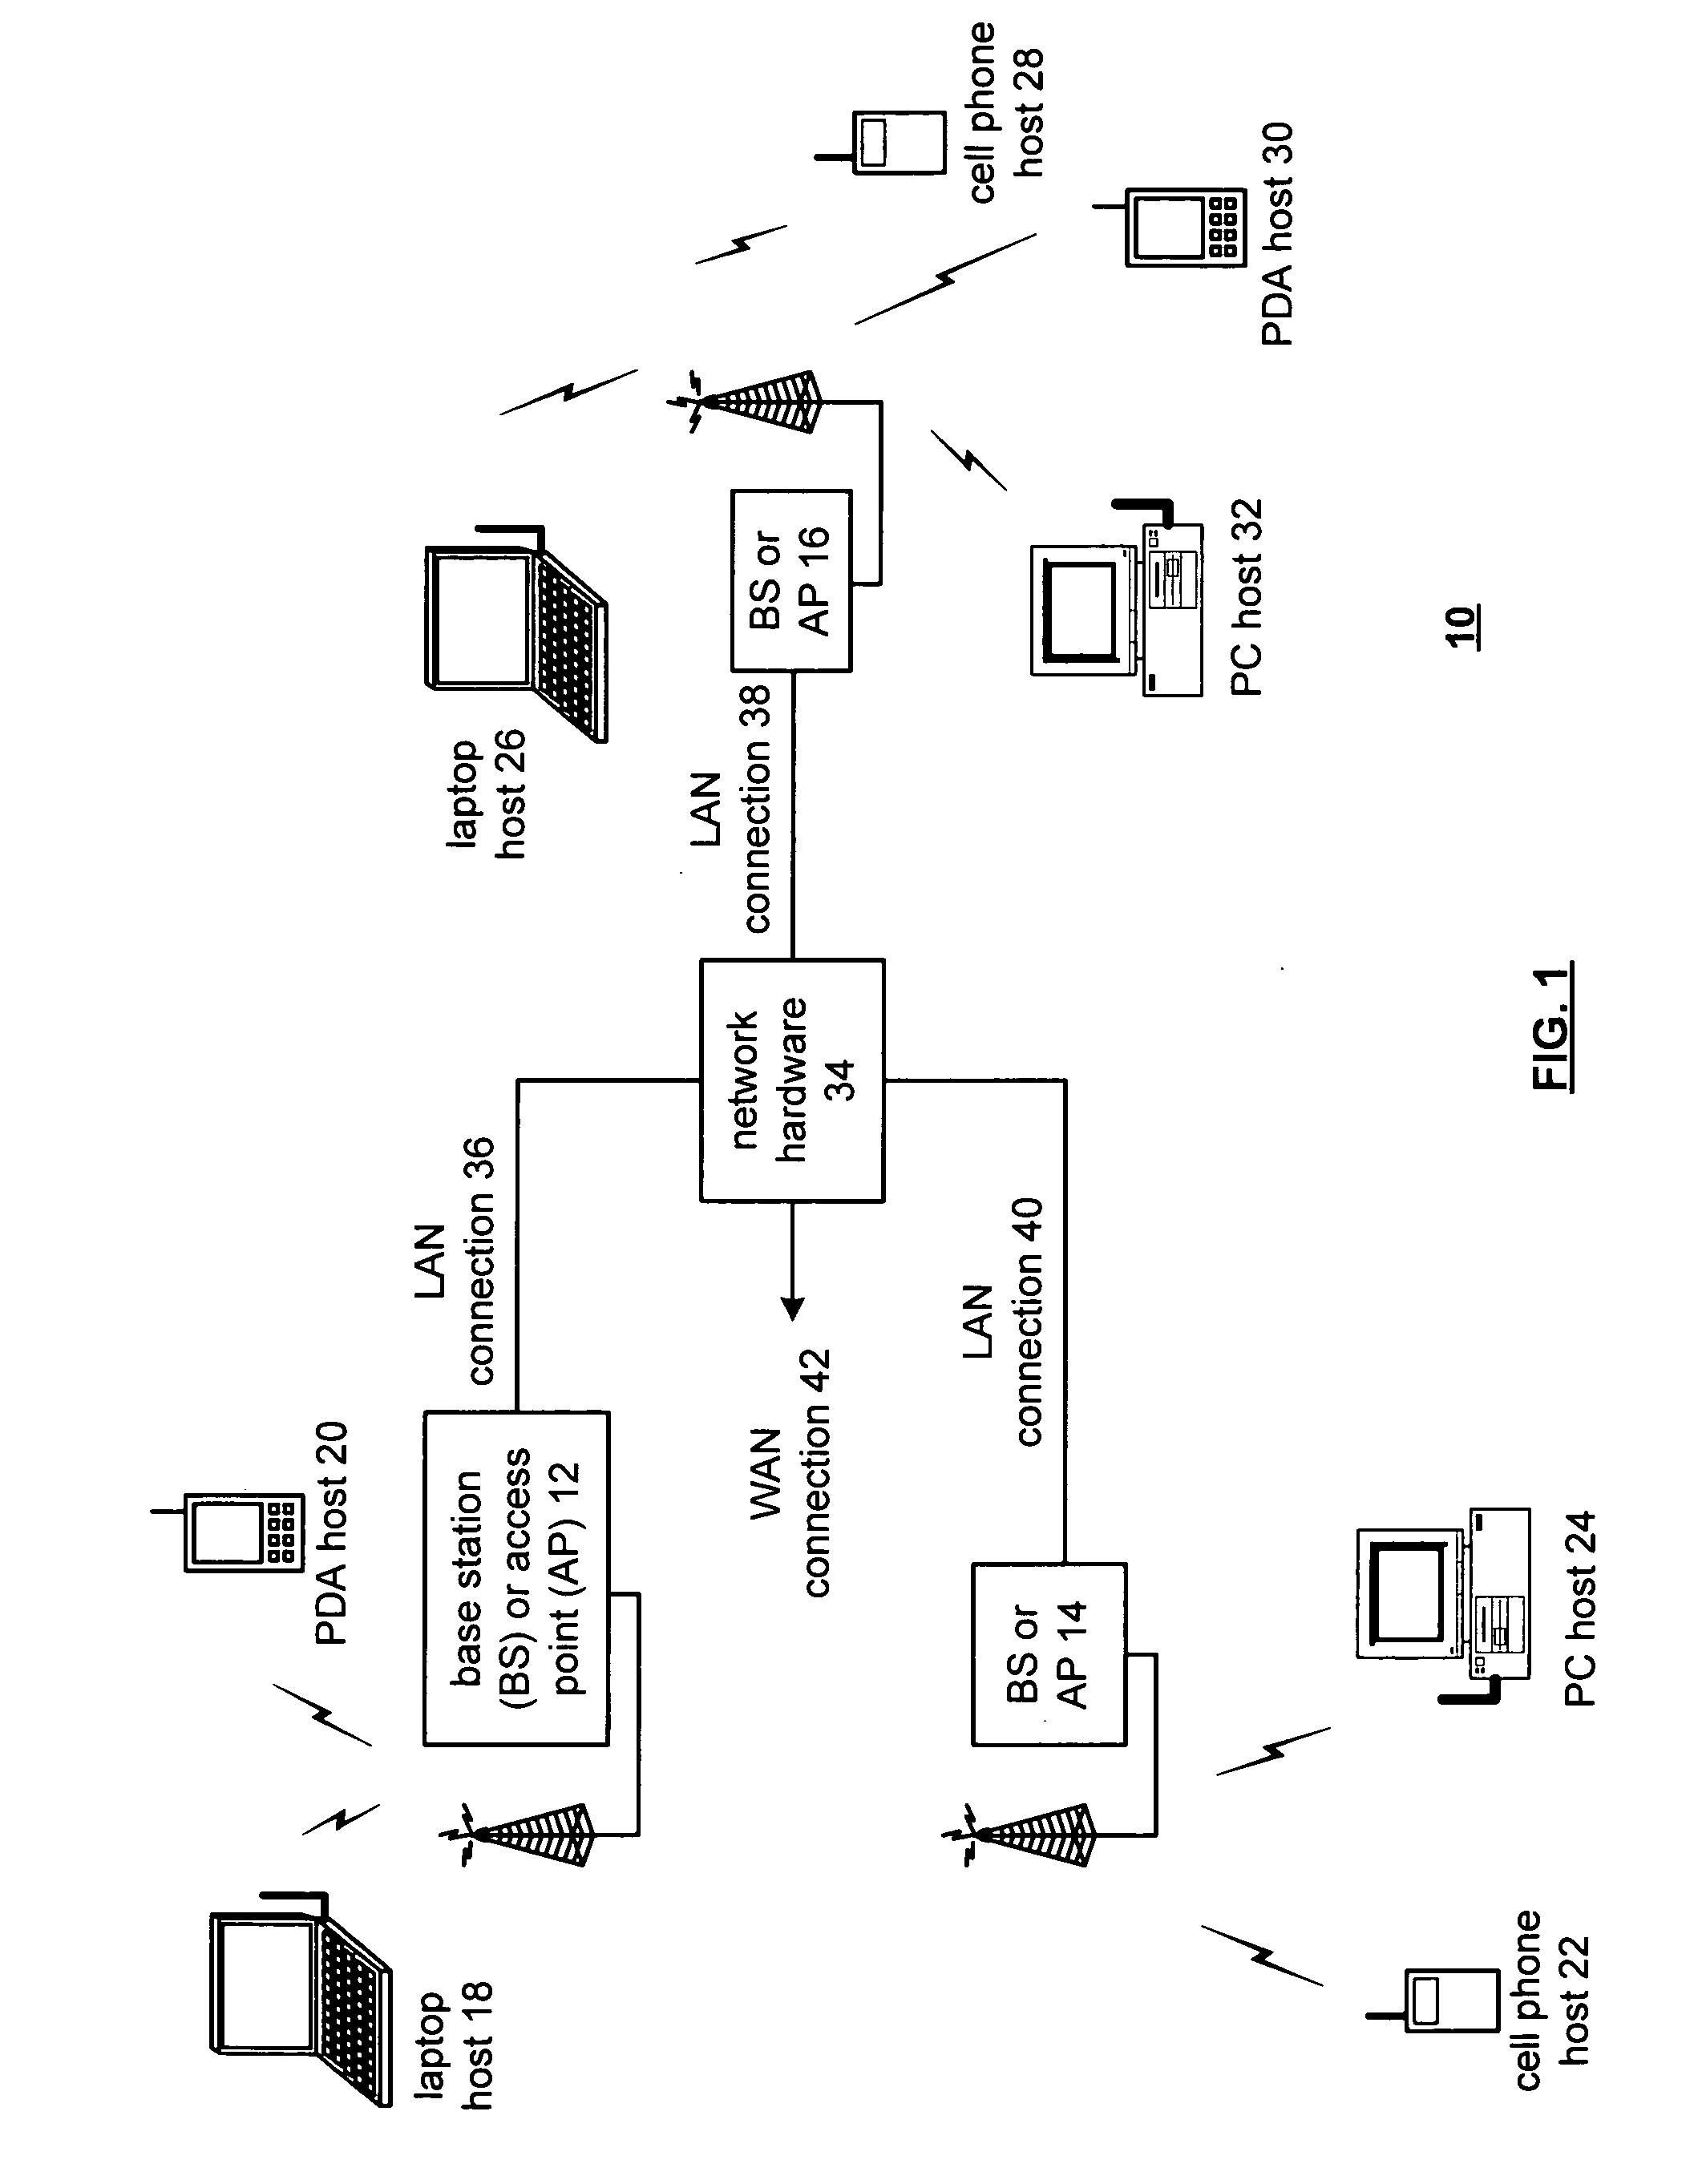 Orthogonal normalization for a radio frequency integrated circuit